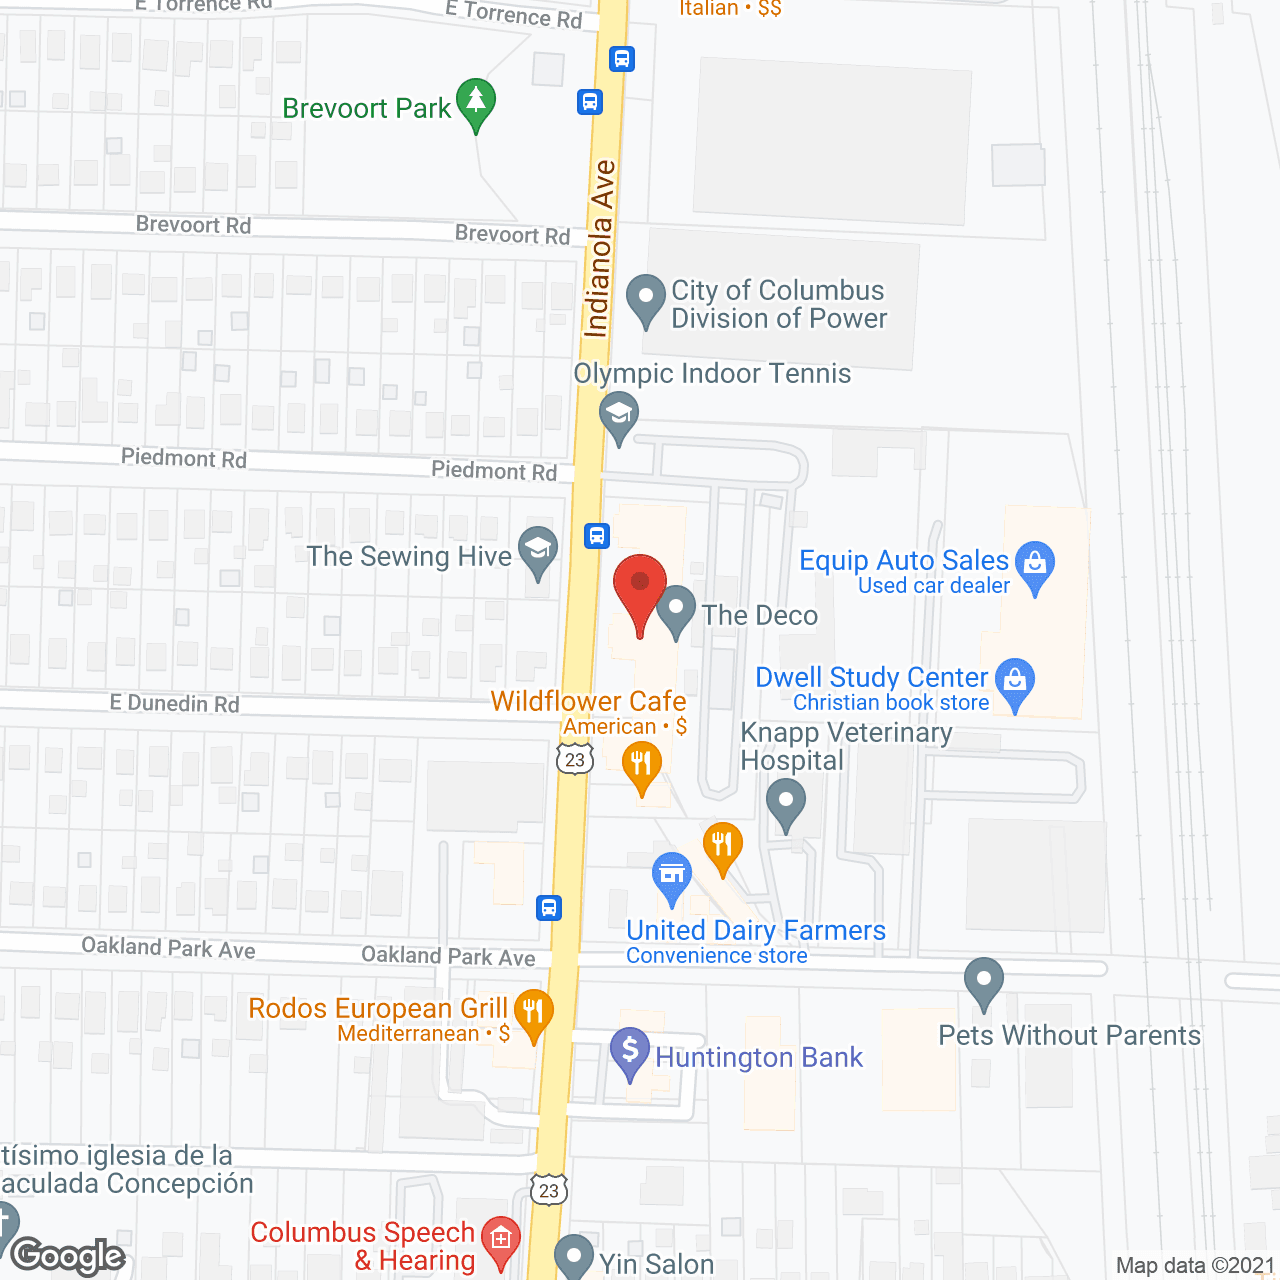 The Deco in google map